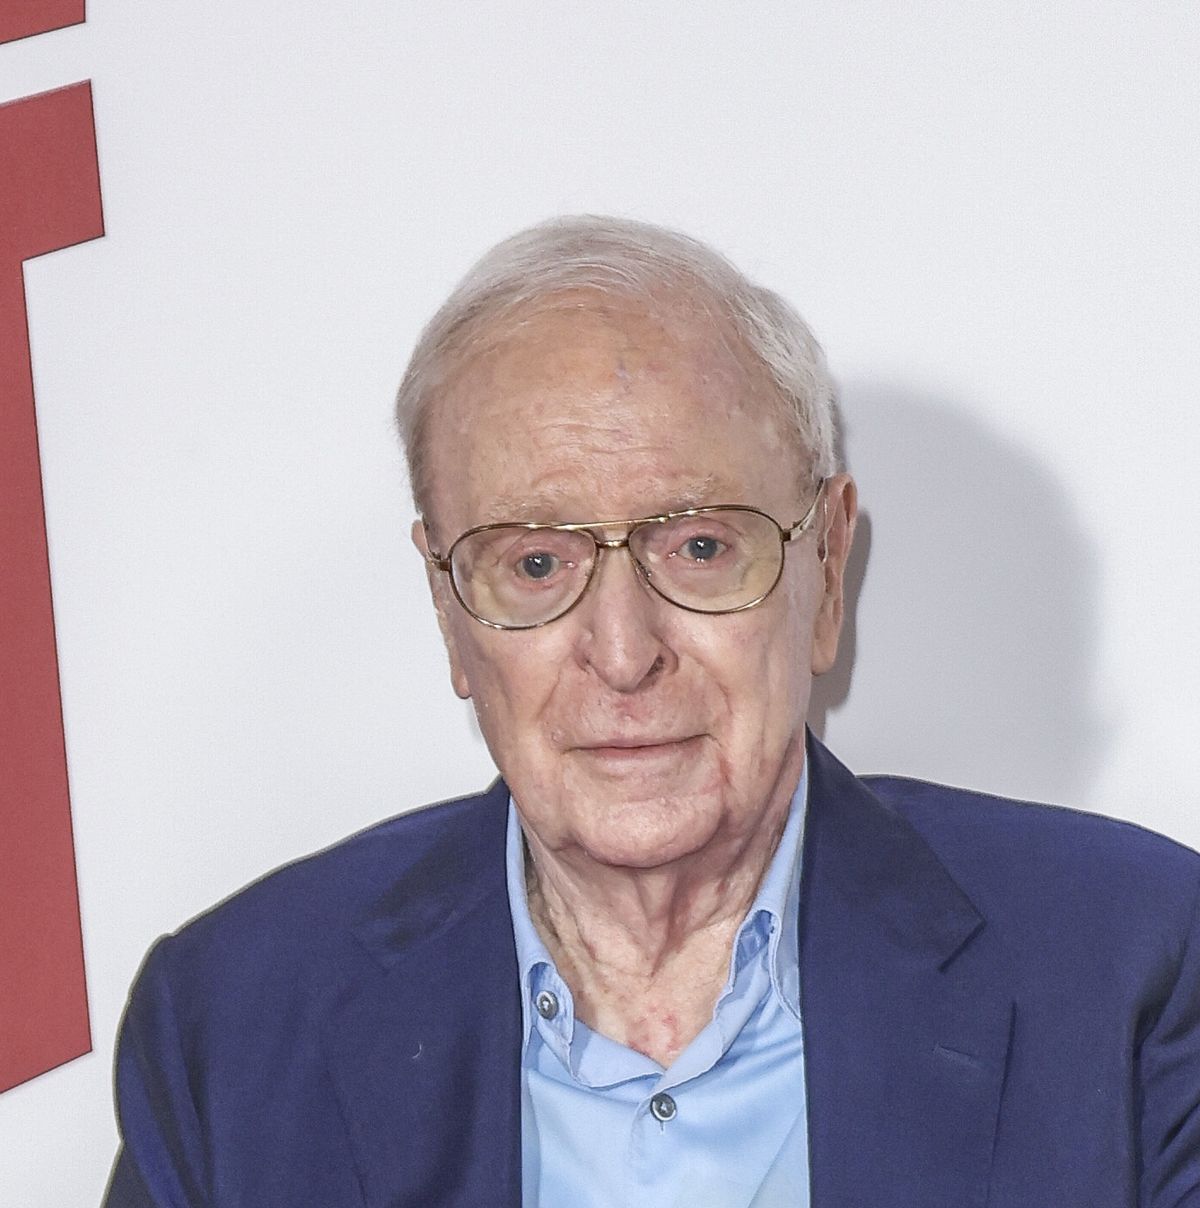 Sir Michael Caine announces his retirement from acting